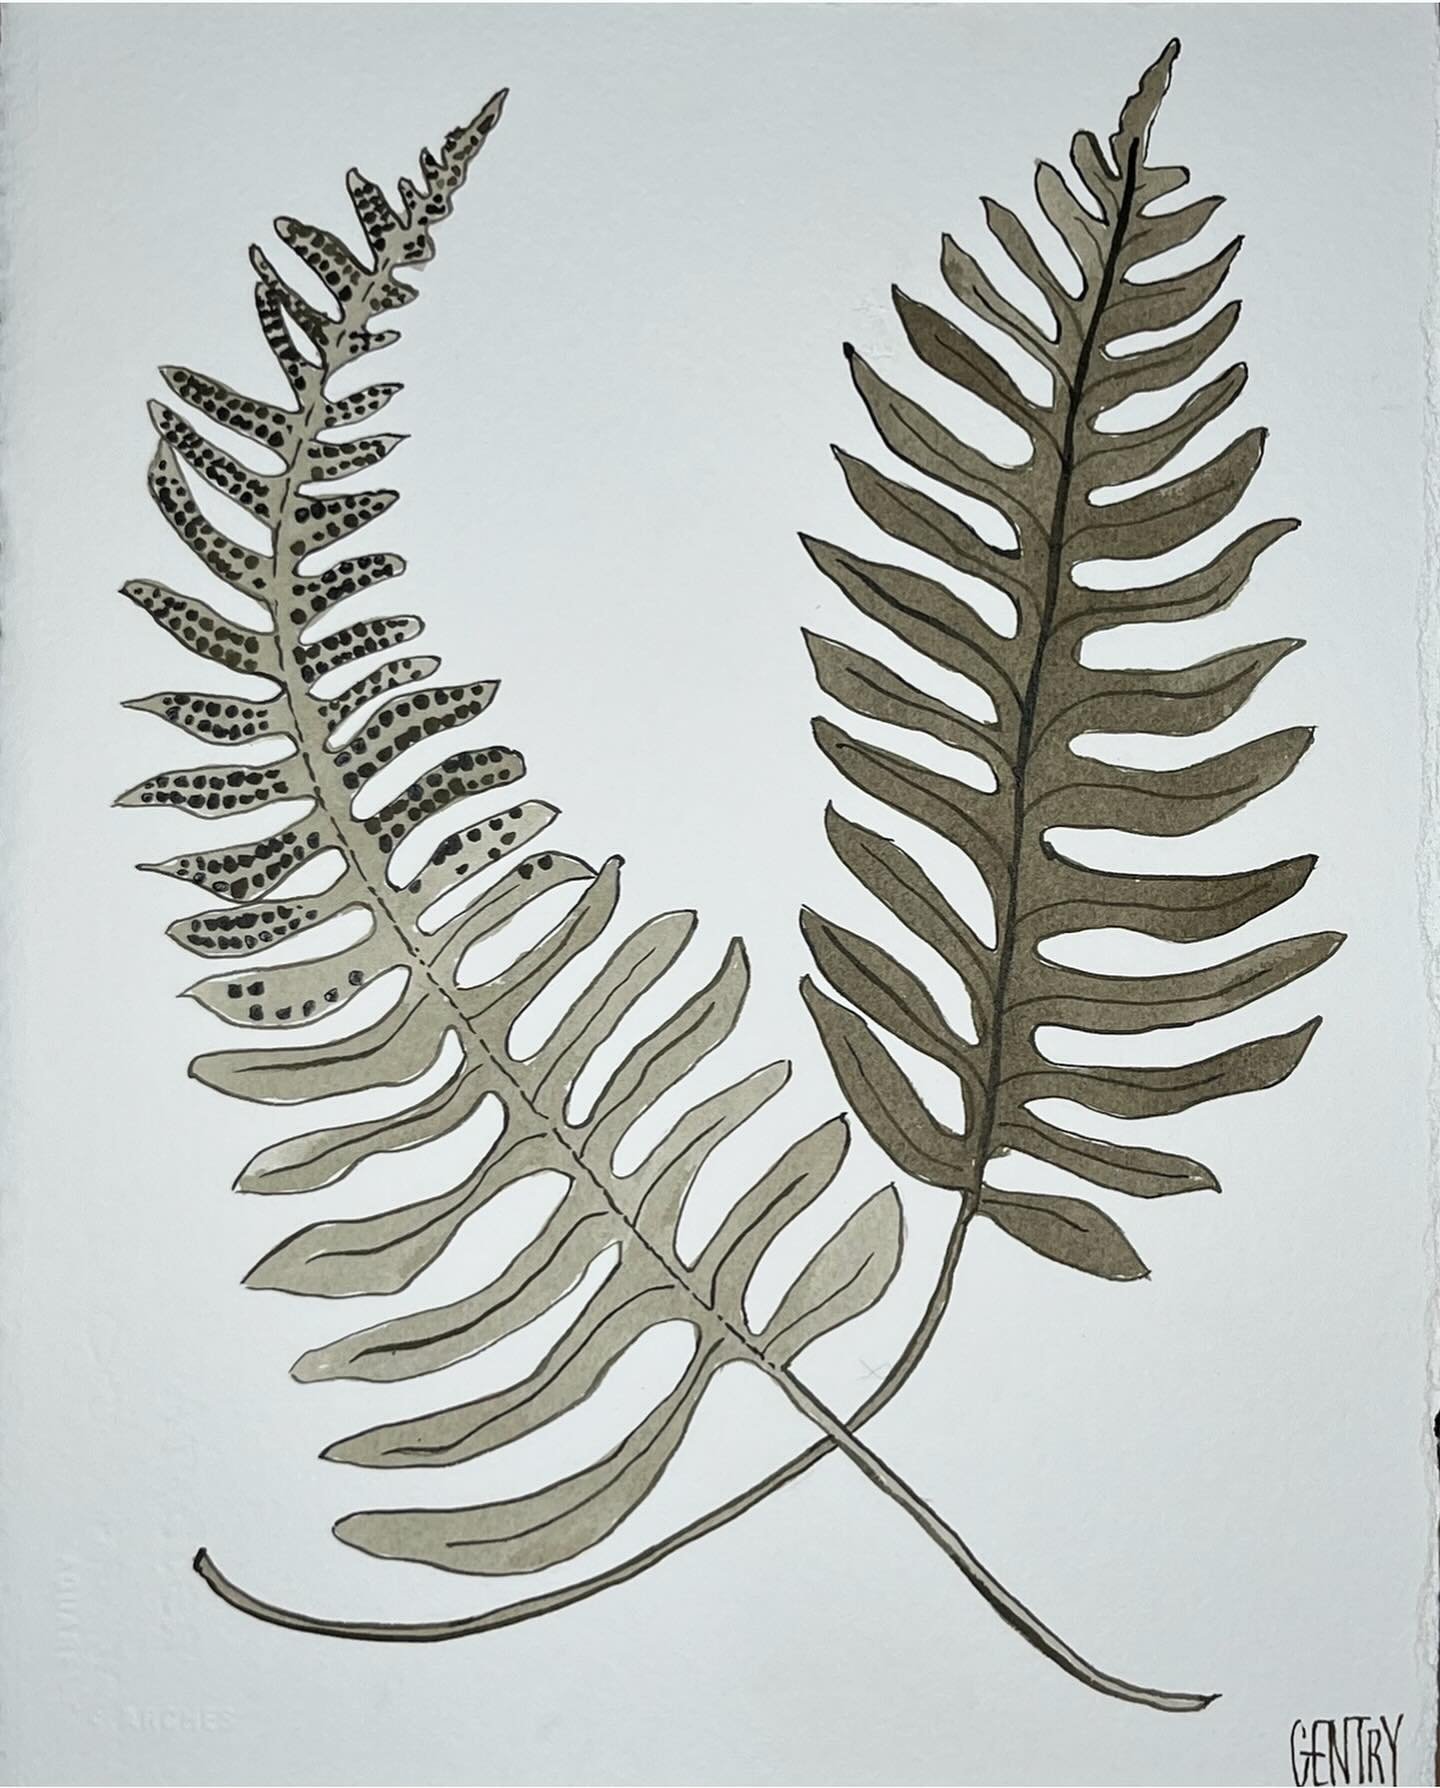 Did you know that a Boston Fern can symbolize sincerity? 

Ferns are always in style&hellip; In your house or on your walls&hellip; Sincerely Yours! 

DM for more information
Or to commission your favorite palette

#fernsofinstagram #interiors #inkan